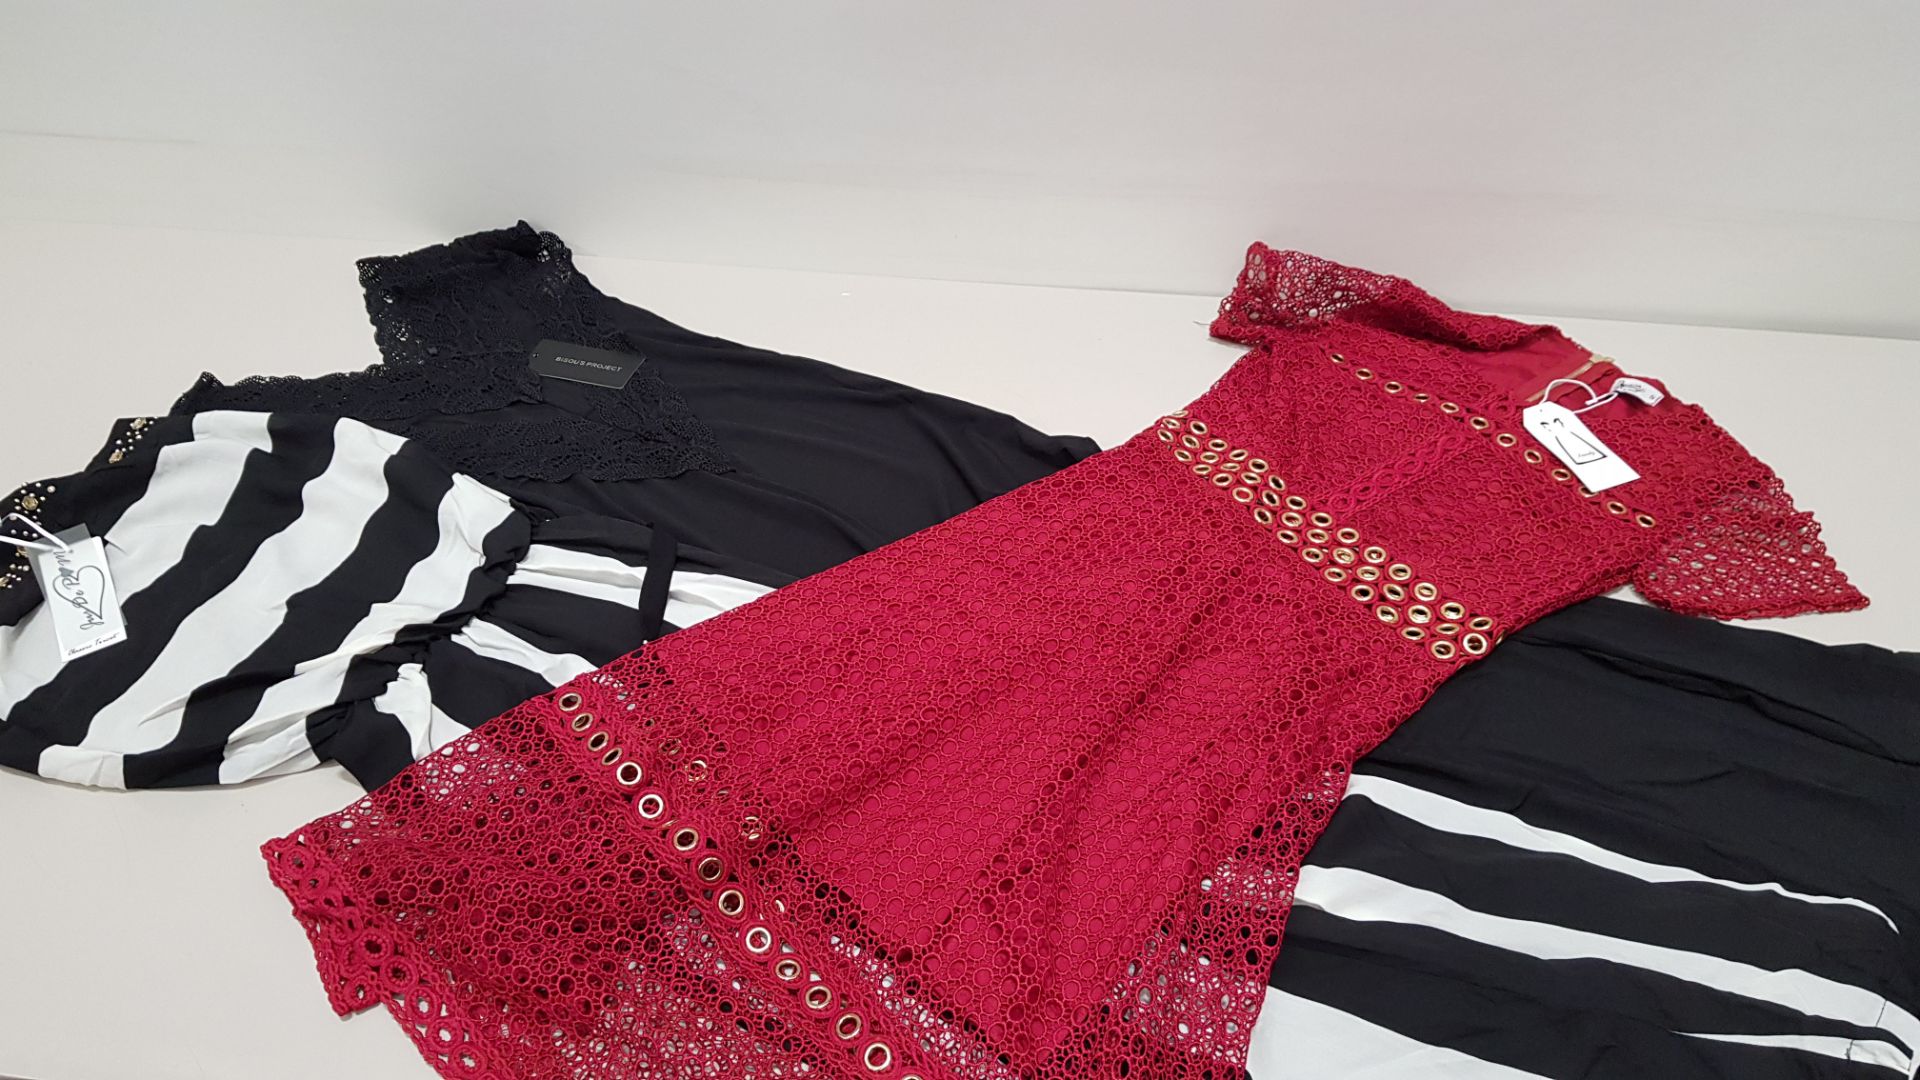 18 PIECE CLOTHING LOT CONTAINING MY COLLECTION BLACK DRESSES, DANITY RED DRESSES AND CLASSIC